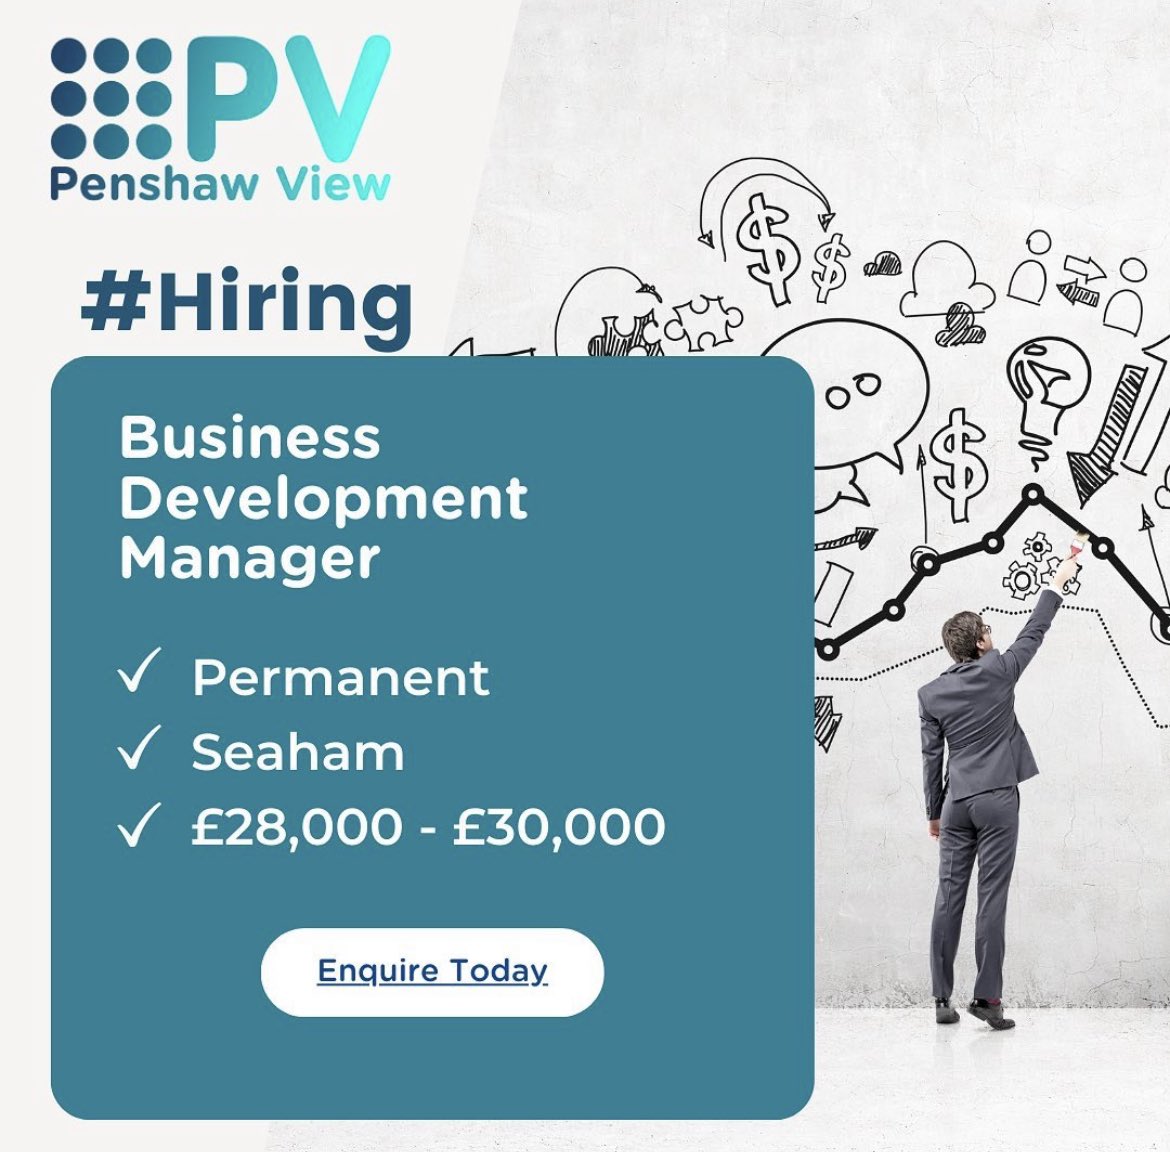 An exciting new role has become available as a Business Development Manager in Seaham preferably with a health and safety background, to join an established company. 

#seahamjobs #sunderland #business #developmentmanager